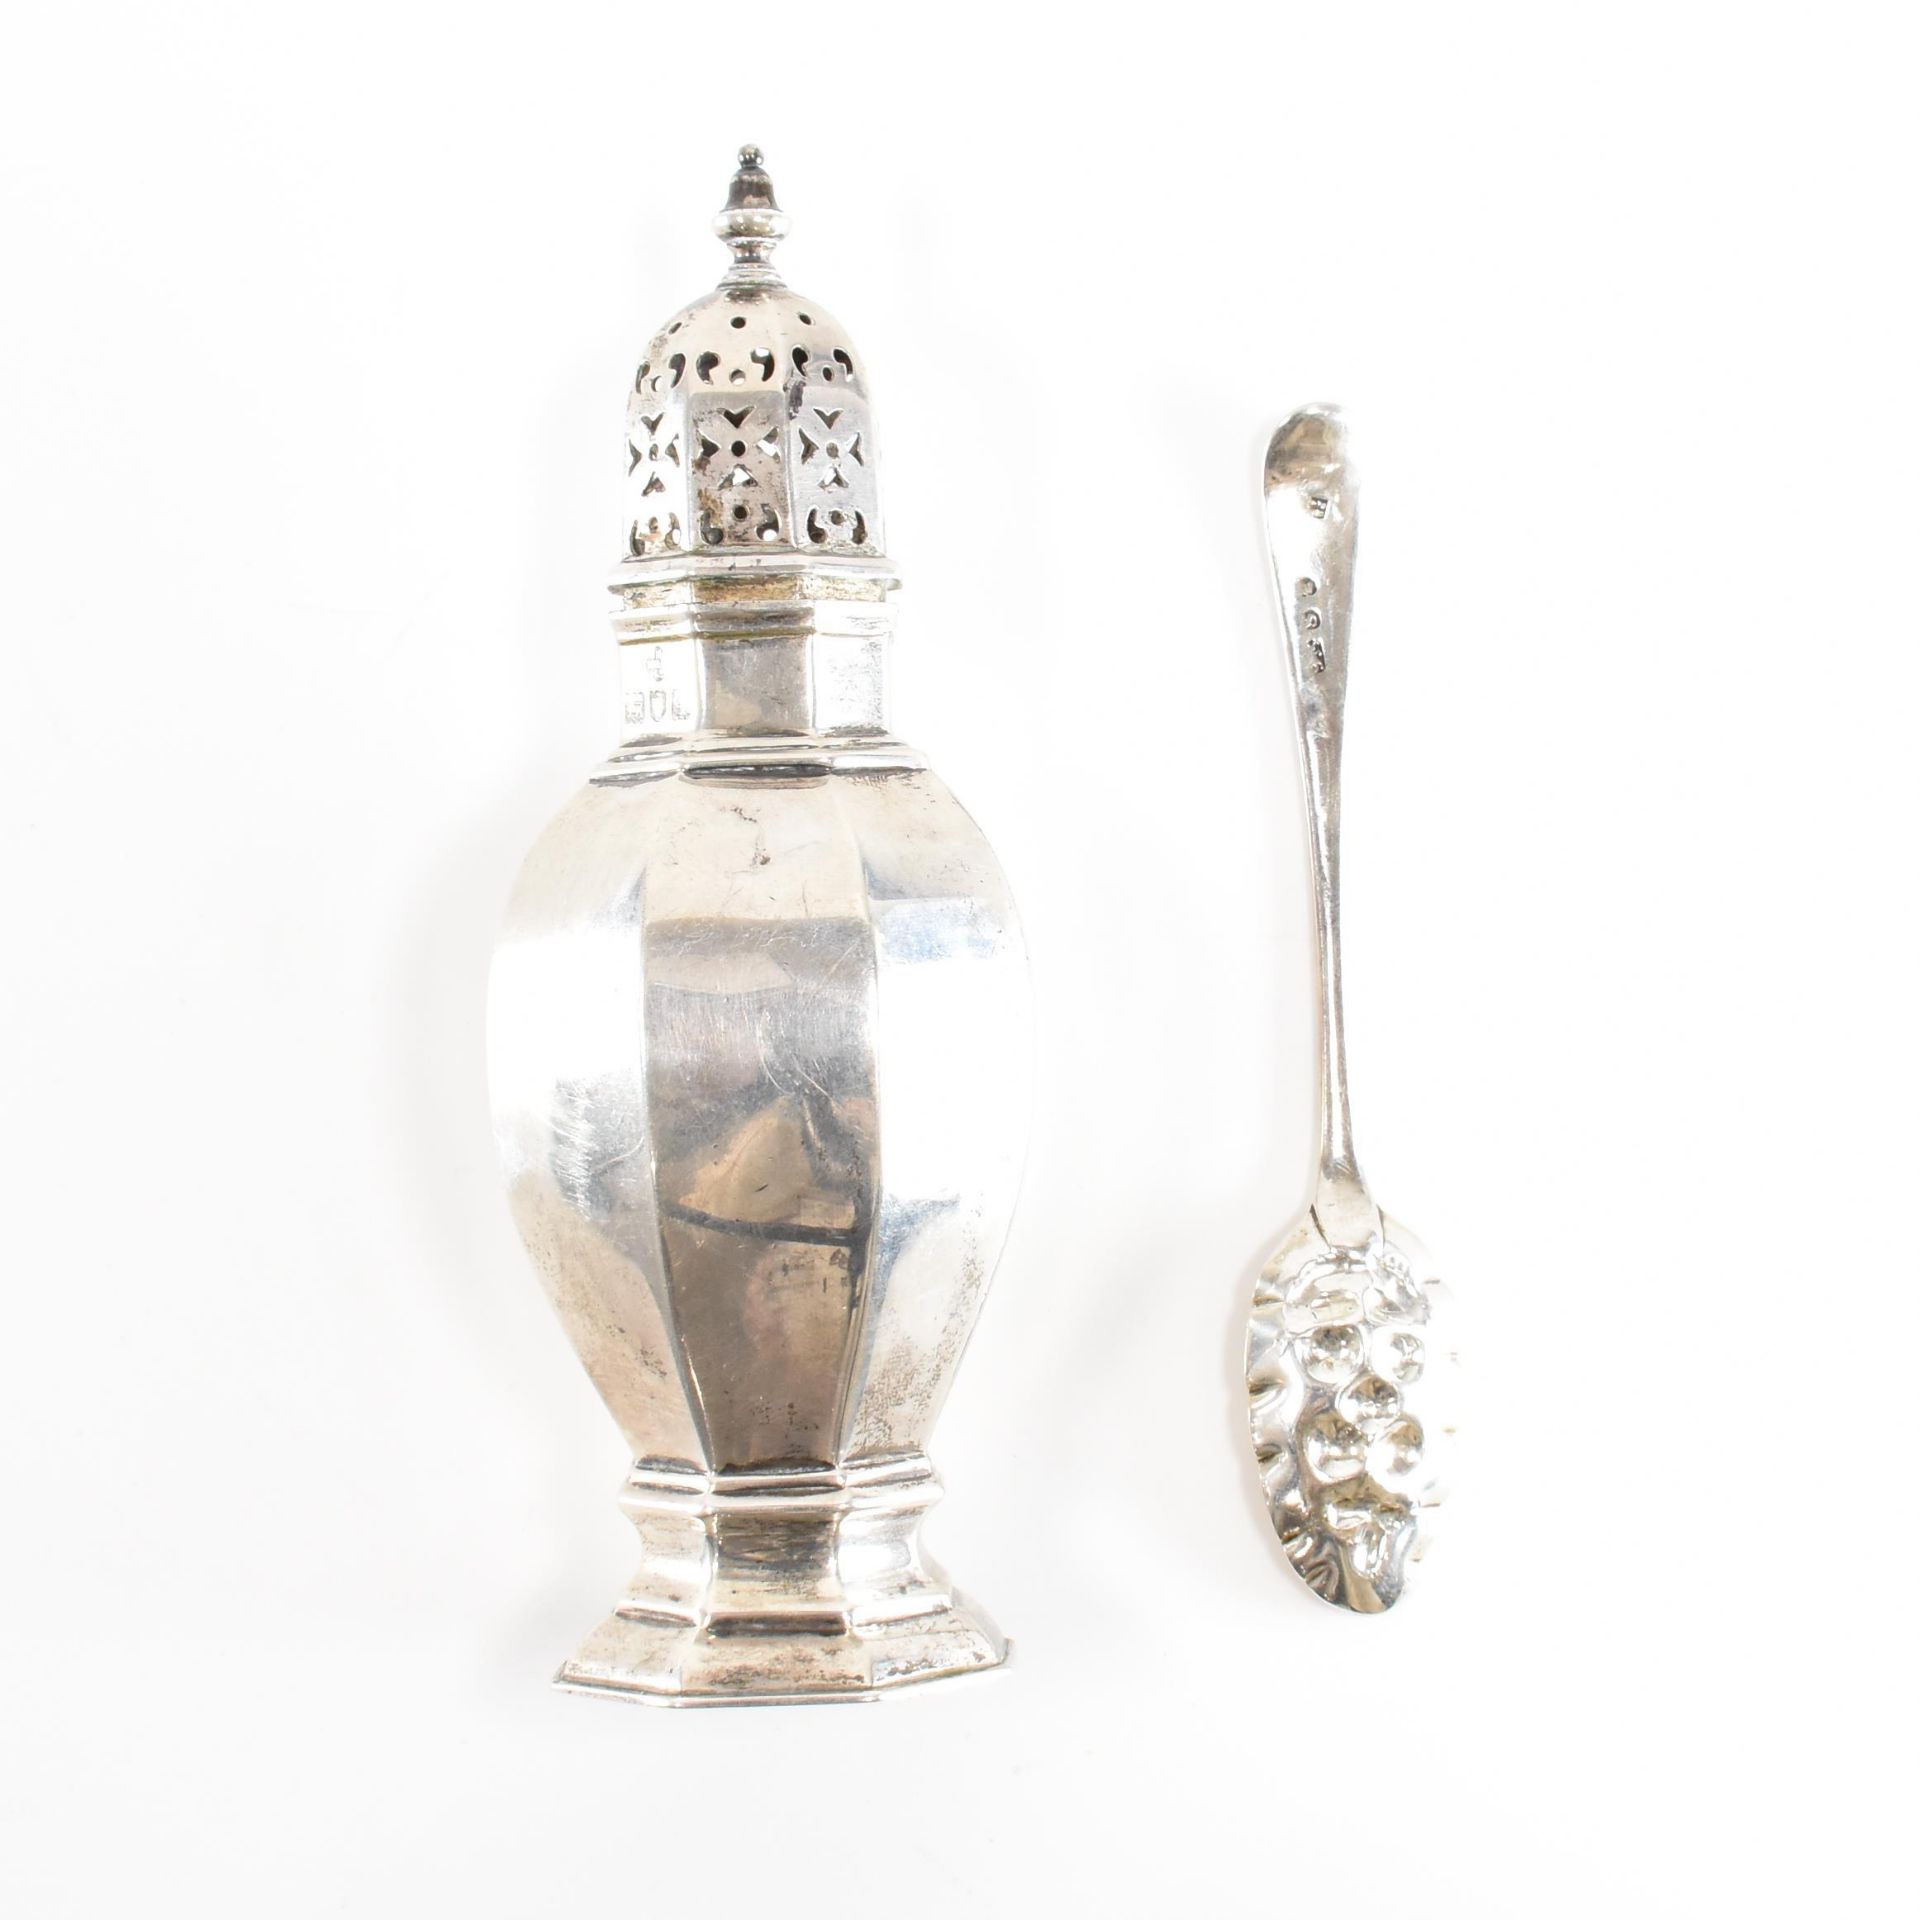 A GEORGE III SILVER BERRY SPOON TOGETHER WITH A GEORGE V SILVER CRUET - Image 2 of 4